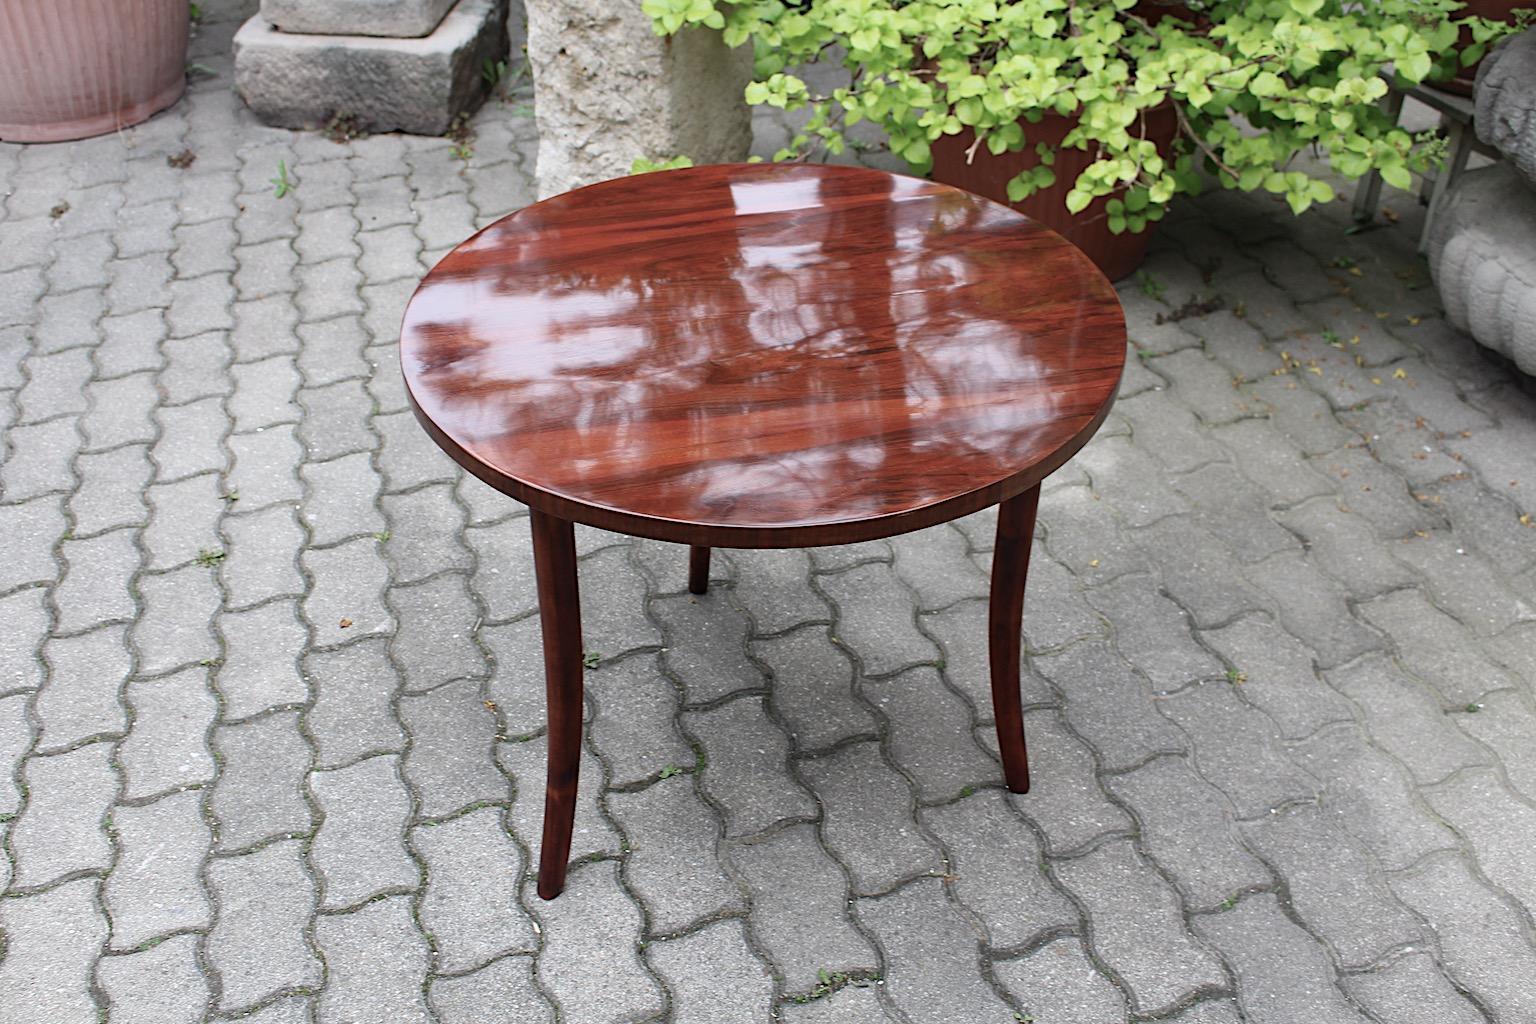 Art Deco vintage coffee table or side table by Josef Frank for Haus & Garten circa 1928 Austria.
A stunning and sleek Josef Frank coffee table from the Viennese Art Deco period circa 1928 for Haus & Garten from solid walnut and walnut veneer in a